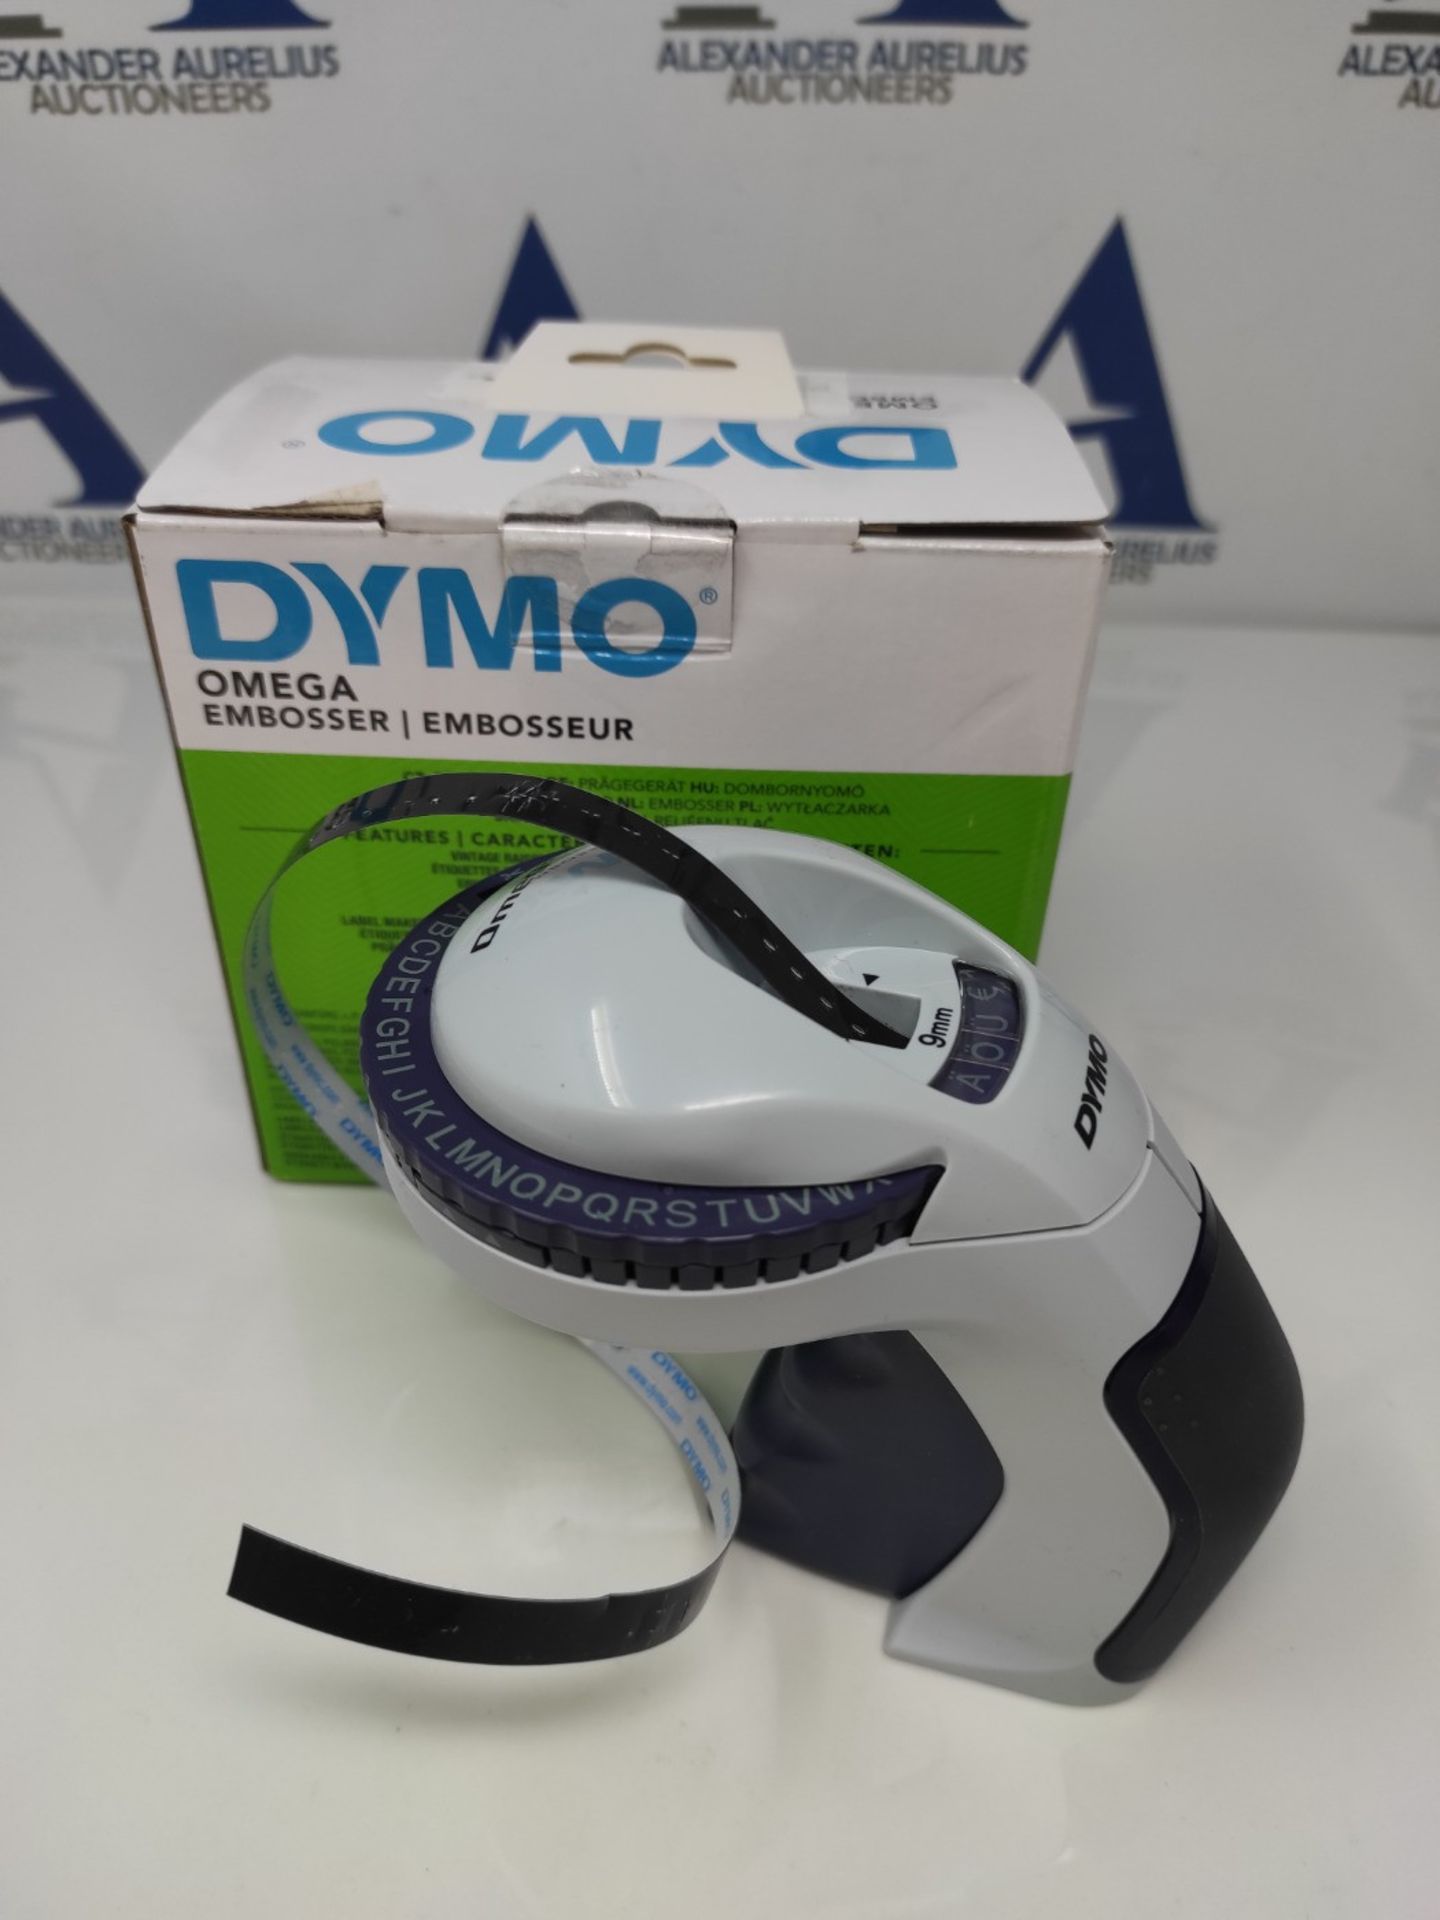 DYMO Embossing device with 3 embossing tapes | Omega labeling device starter set | sma - Image 2 of 3